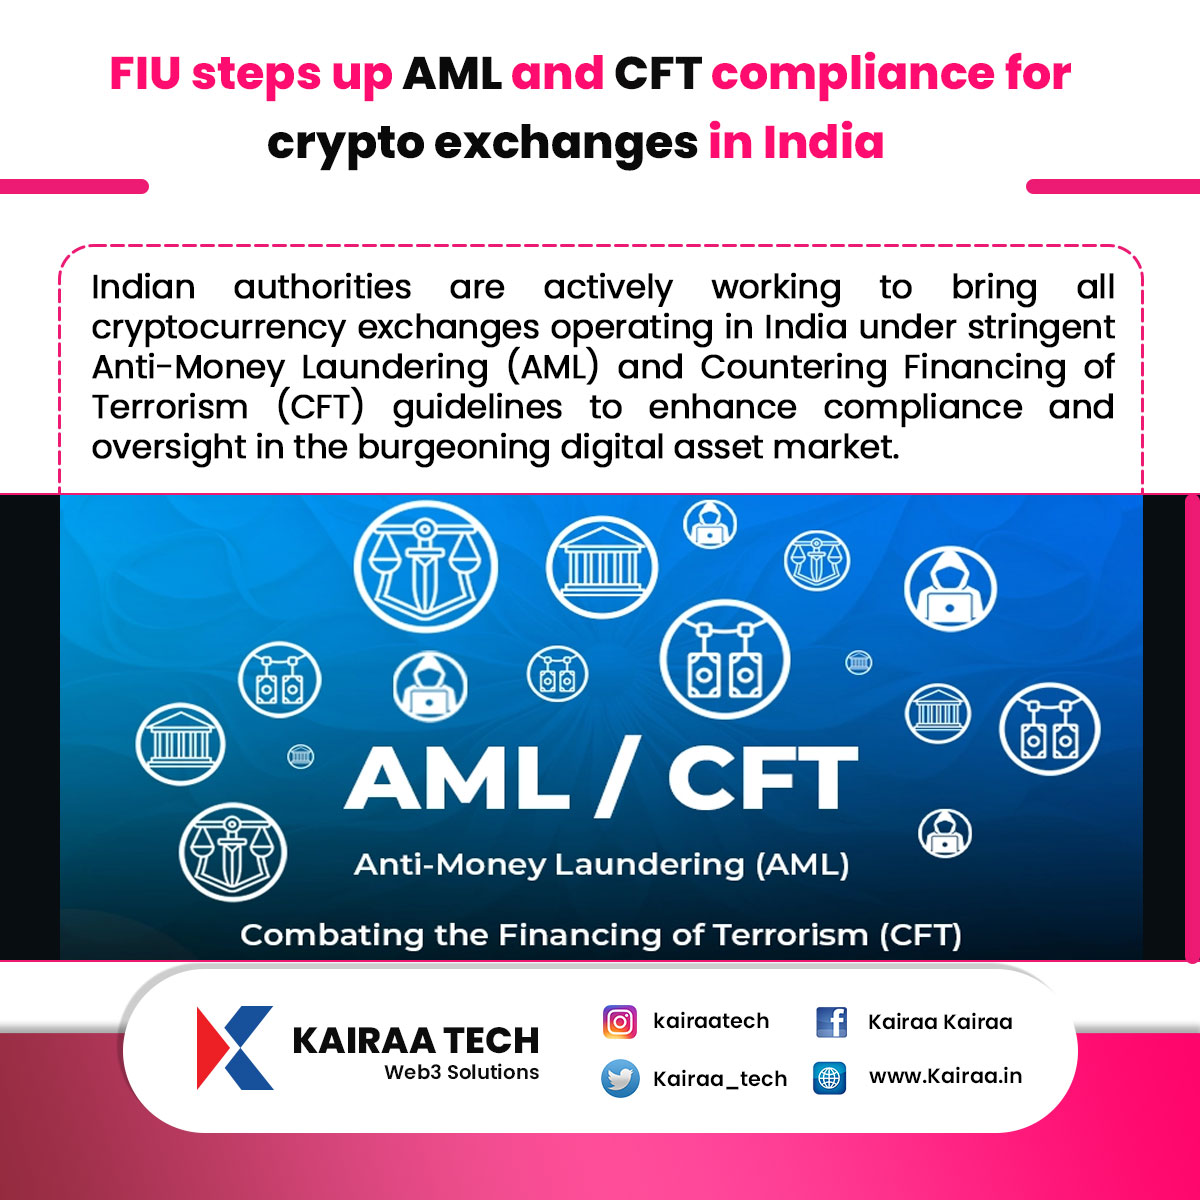 FIU improves AML and CFT compliance for Indian cryptocurrency exchanges.

For more details and updates.
Website: kairaa.in
Mail Id: Support@kairaatechserve.com

#kairaa #techserve #FIU #cryptocurrency #blockchain #cryptoexchanges #technology #socialmedia #India